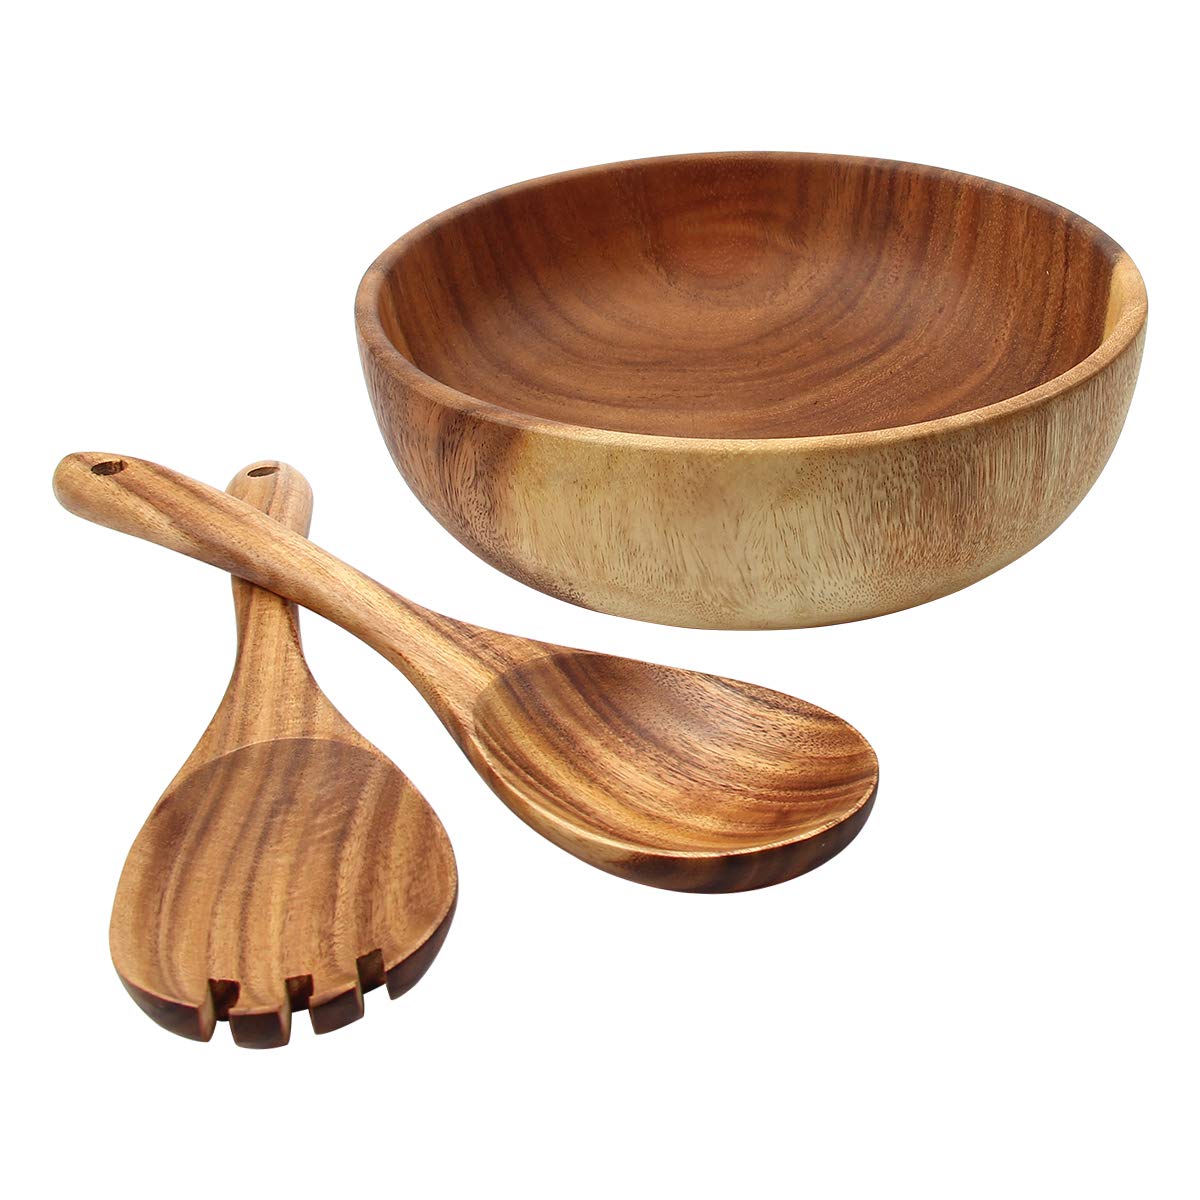 Mochiglory Acacia Woonden Salad Bowl with Servers Set, 9.4inchs Large Salad Wooden Bowl with Spoon and Fork for Fruits or Salads（Set of 3）